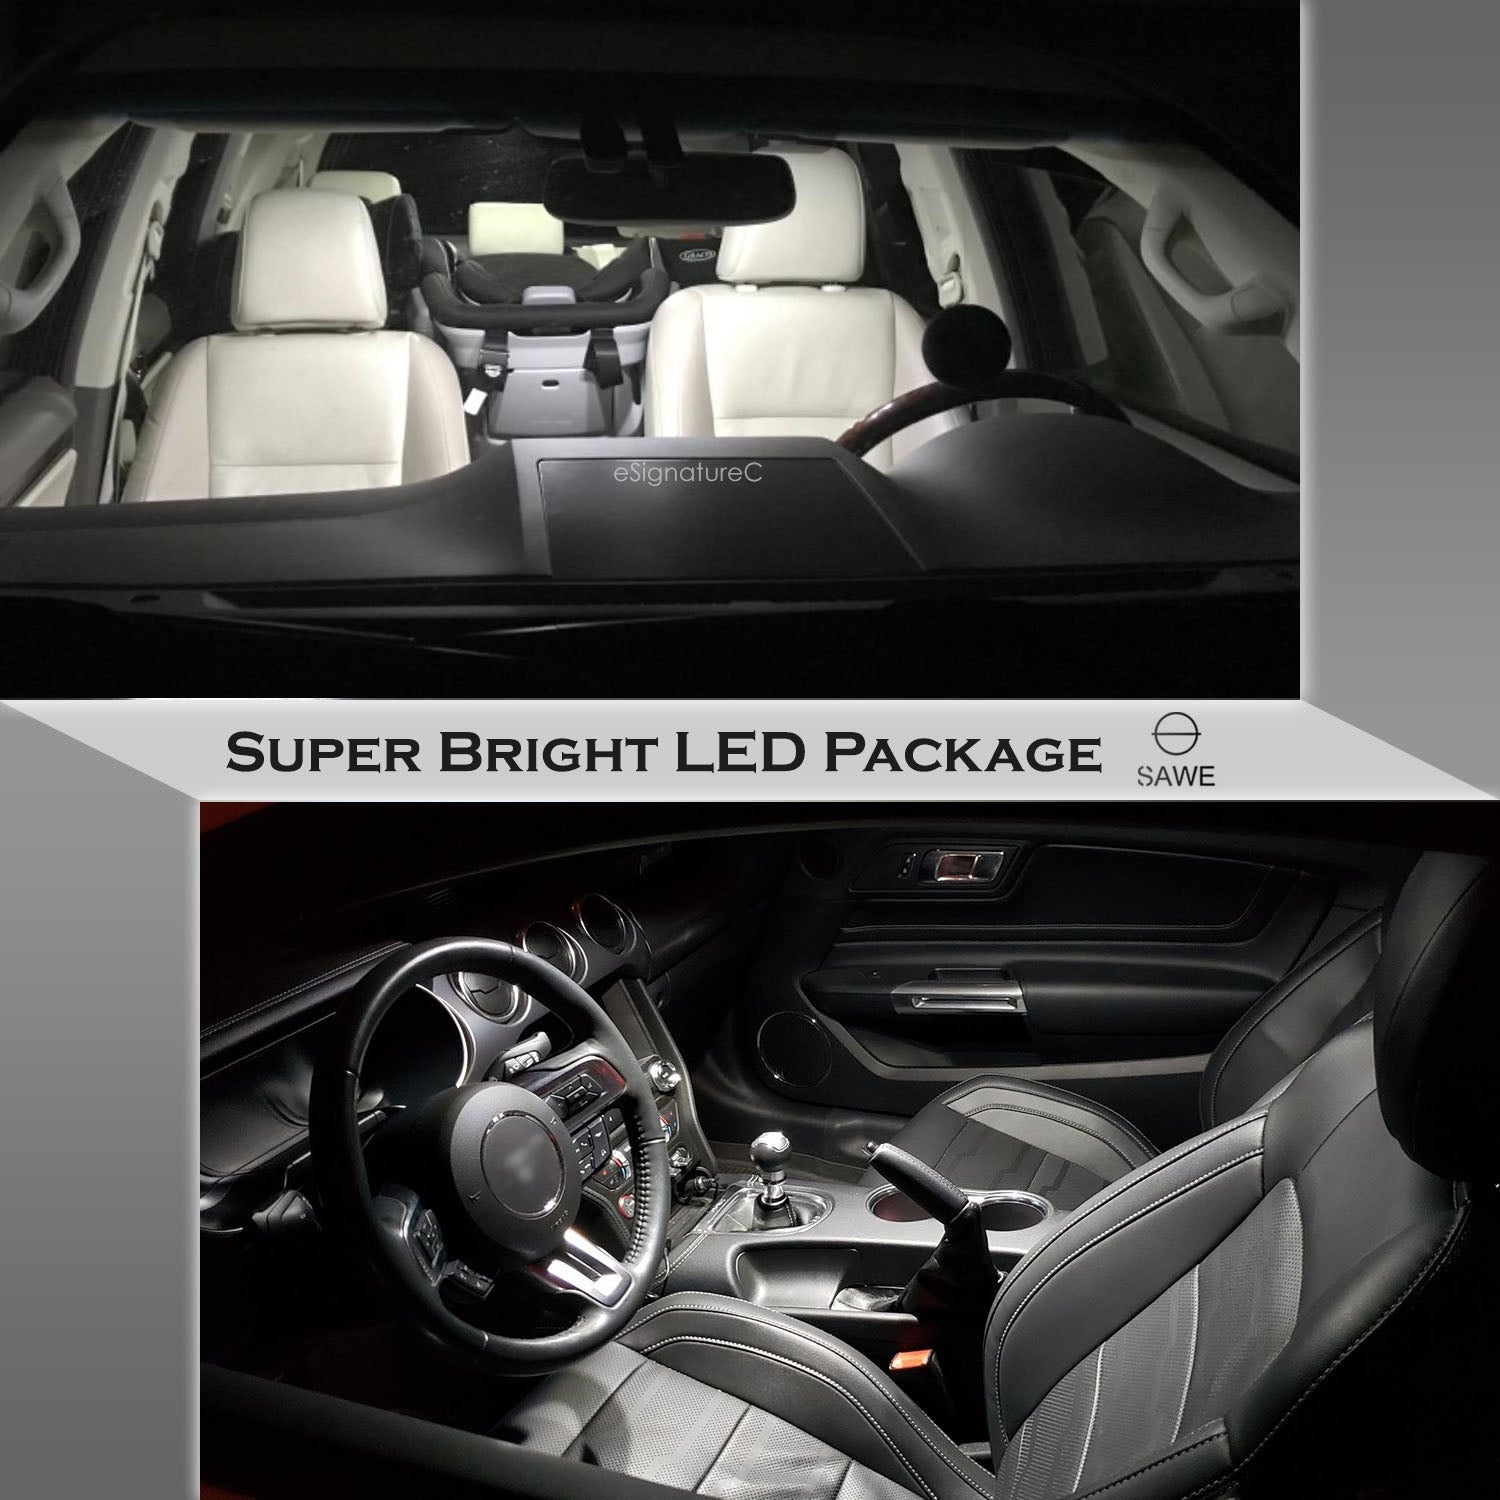 For Toyota Camry Interior LED Lights - Dome & Map Lights Package Kit for 2002 - 2006 - White